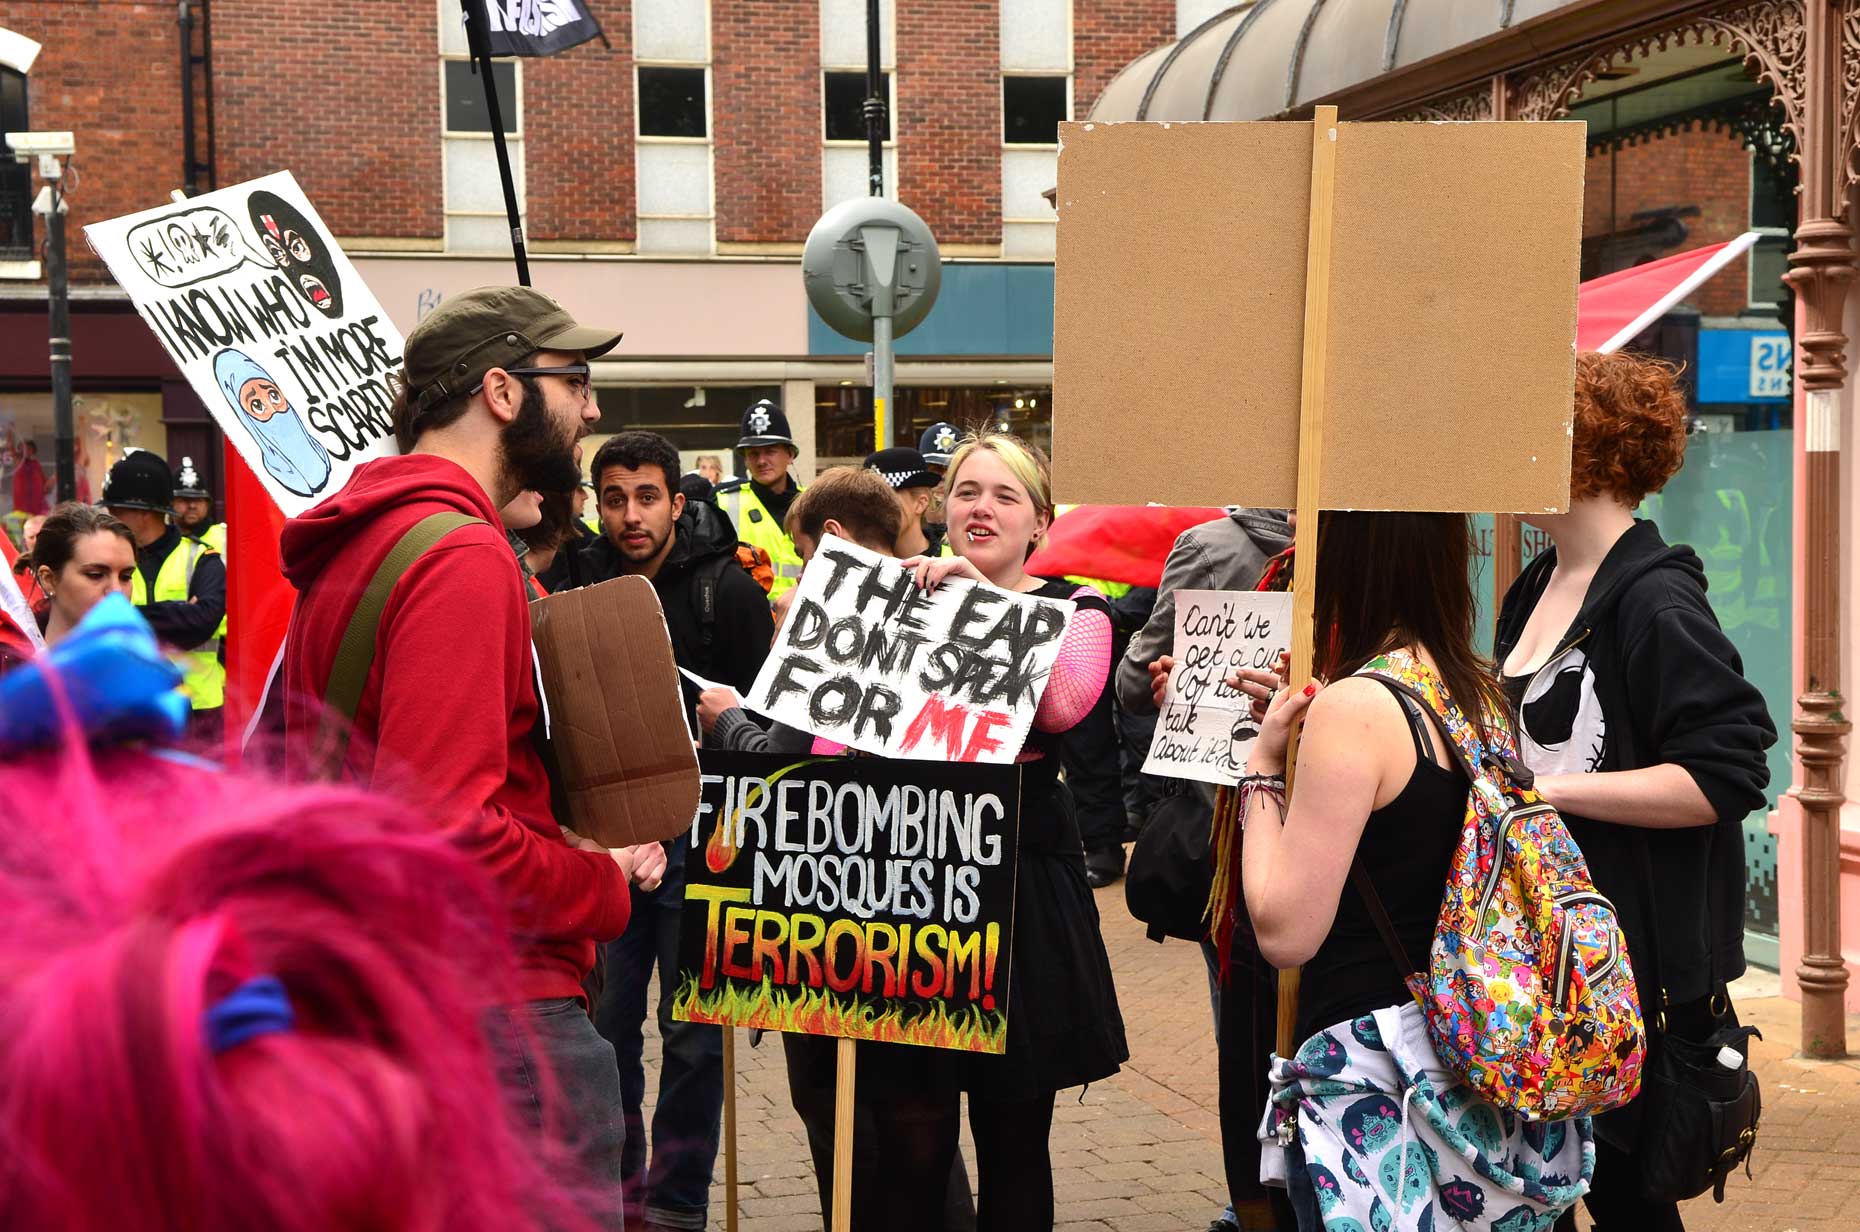 Signs at the anti-racism demo in Cornhill. Photo: Steve Smailes for The Lincolnite